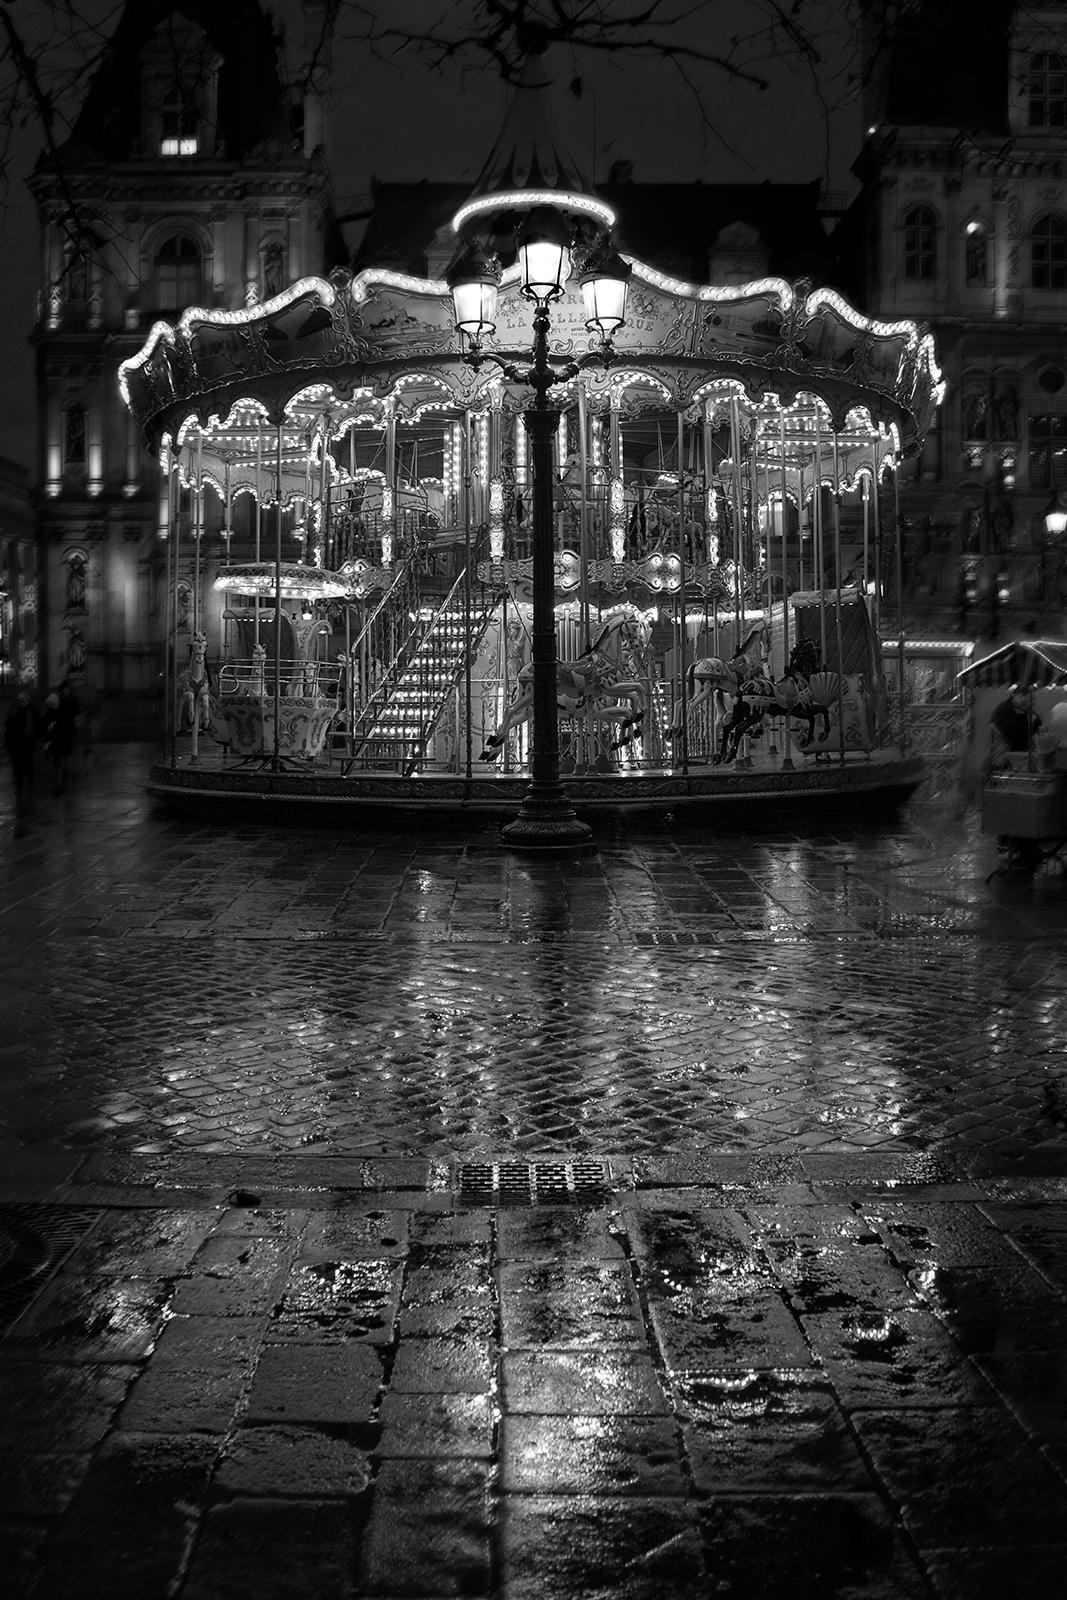 Carrousel-Signed limited edition fine art print,Black and white photo,Paris